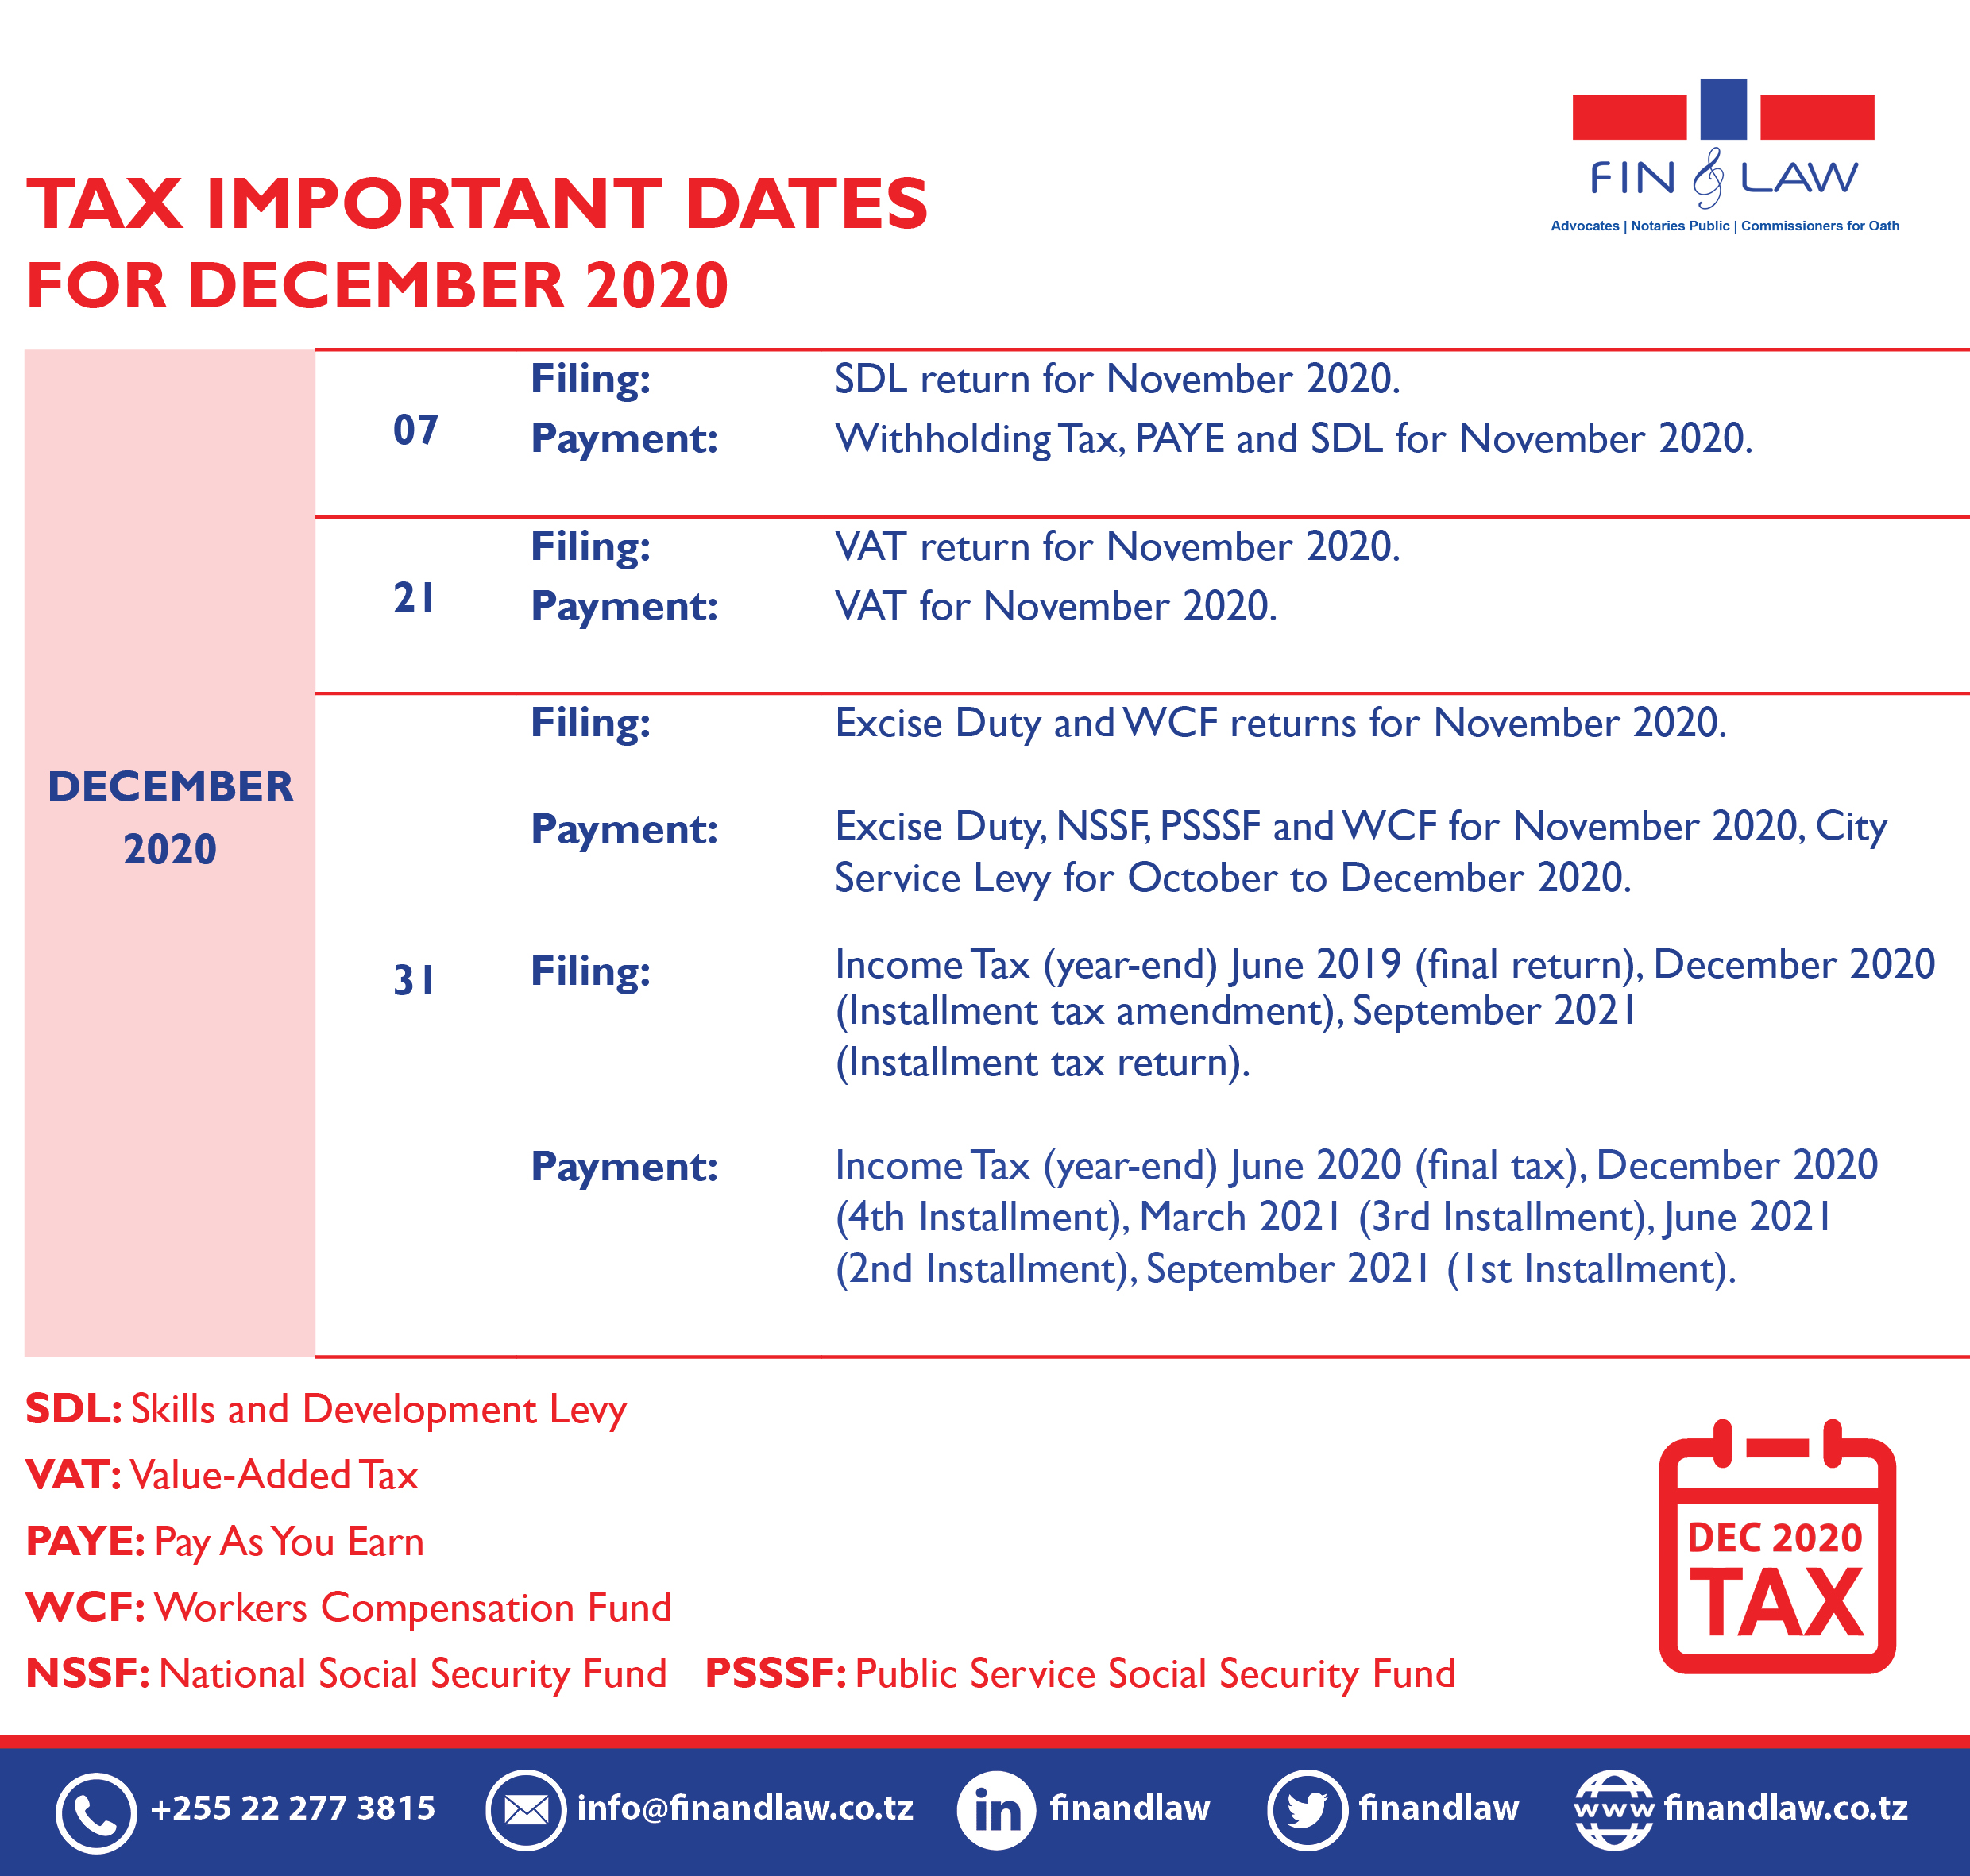 https://finandlaw.co.tz/wp-content/uploads/2021/04/FIN-LAW-Compliance-Update-Tax-and-Compliance-dates-for-December-2020.jpg